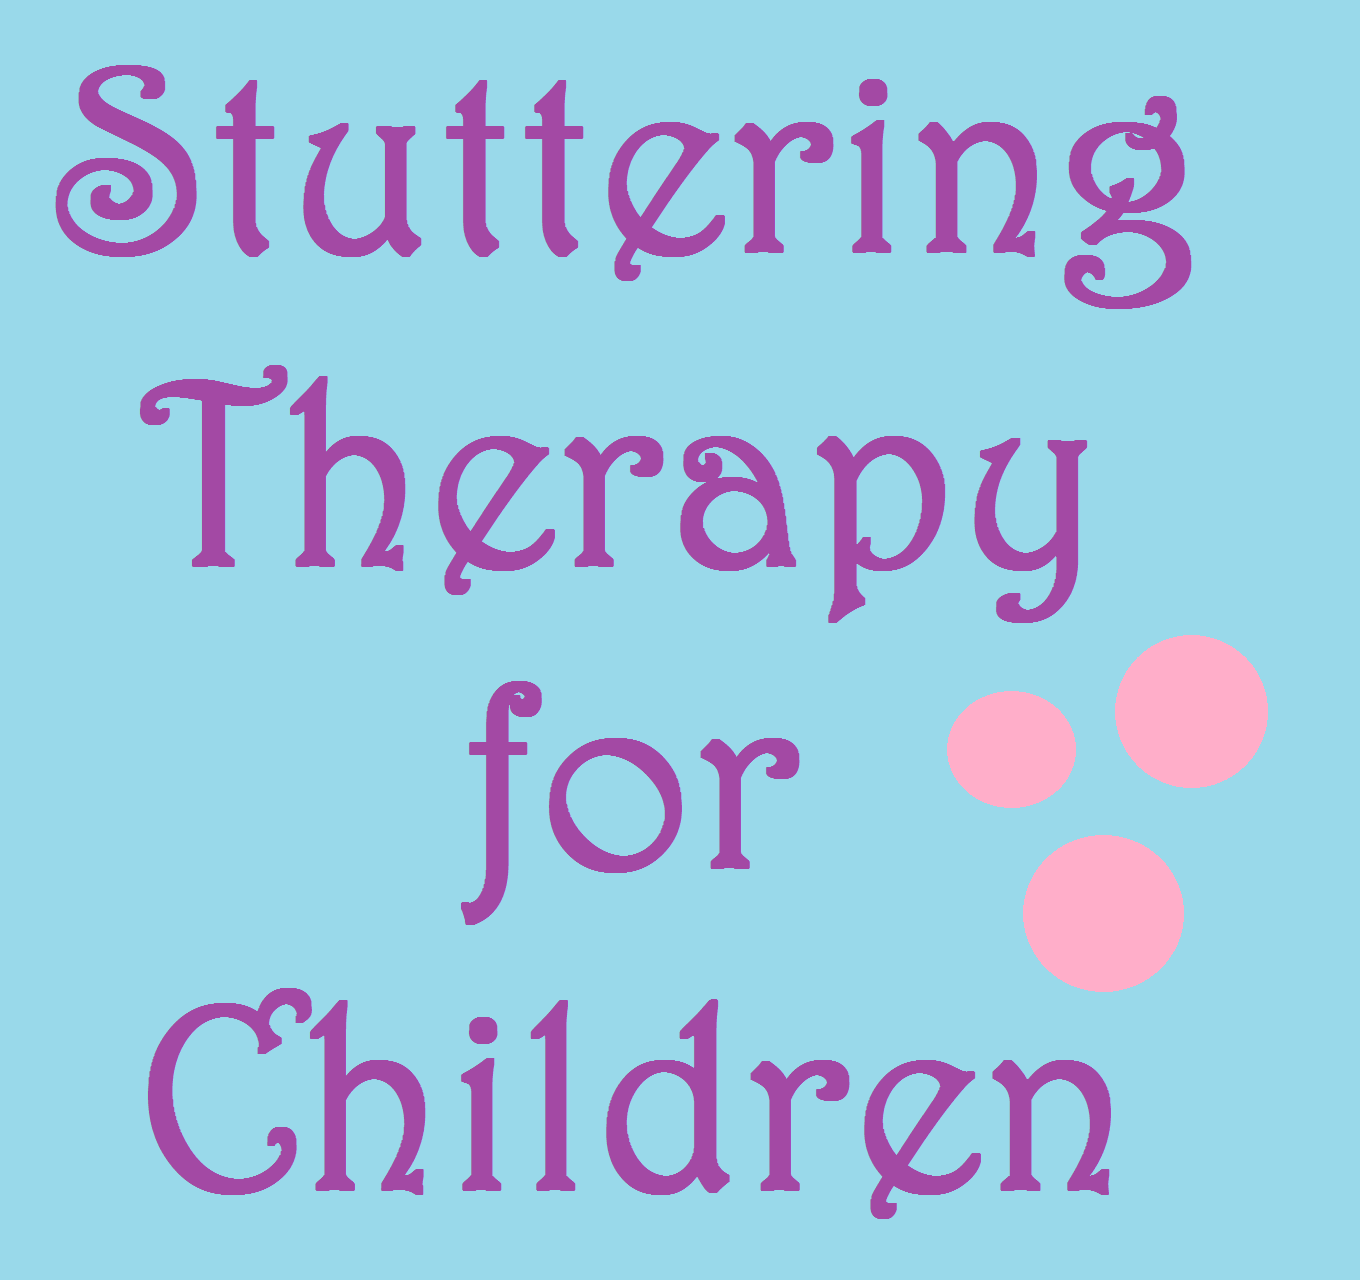 stuttering therapy for children